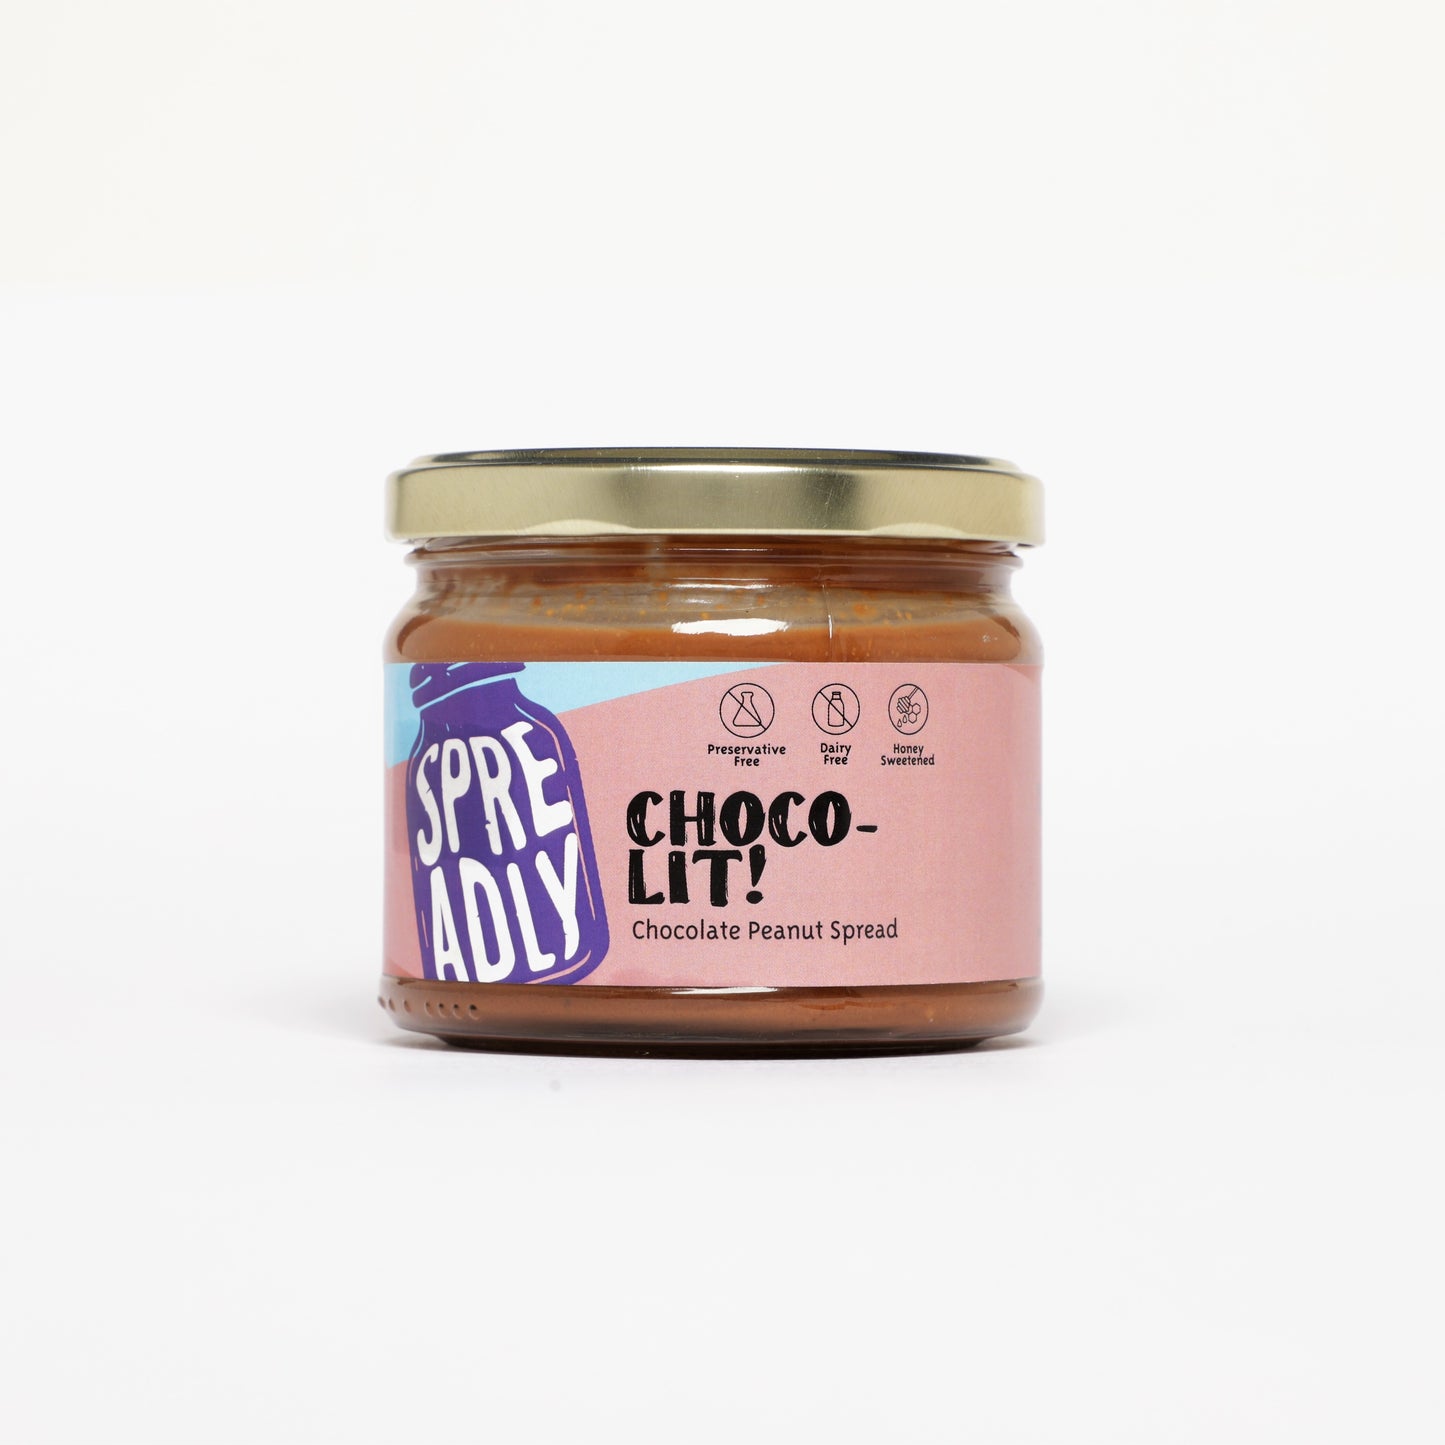 HEALTHY CHOCOLATE PEANUT SPREAD RICH IN ROASTED PEANUTS, DAIRY FREE DARK CHOCOLATE AND SWEETENED WITH HONEY. FREE OF PRESERVATIVES, OIL AND DAIRY. 